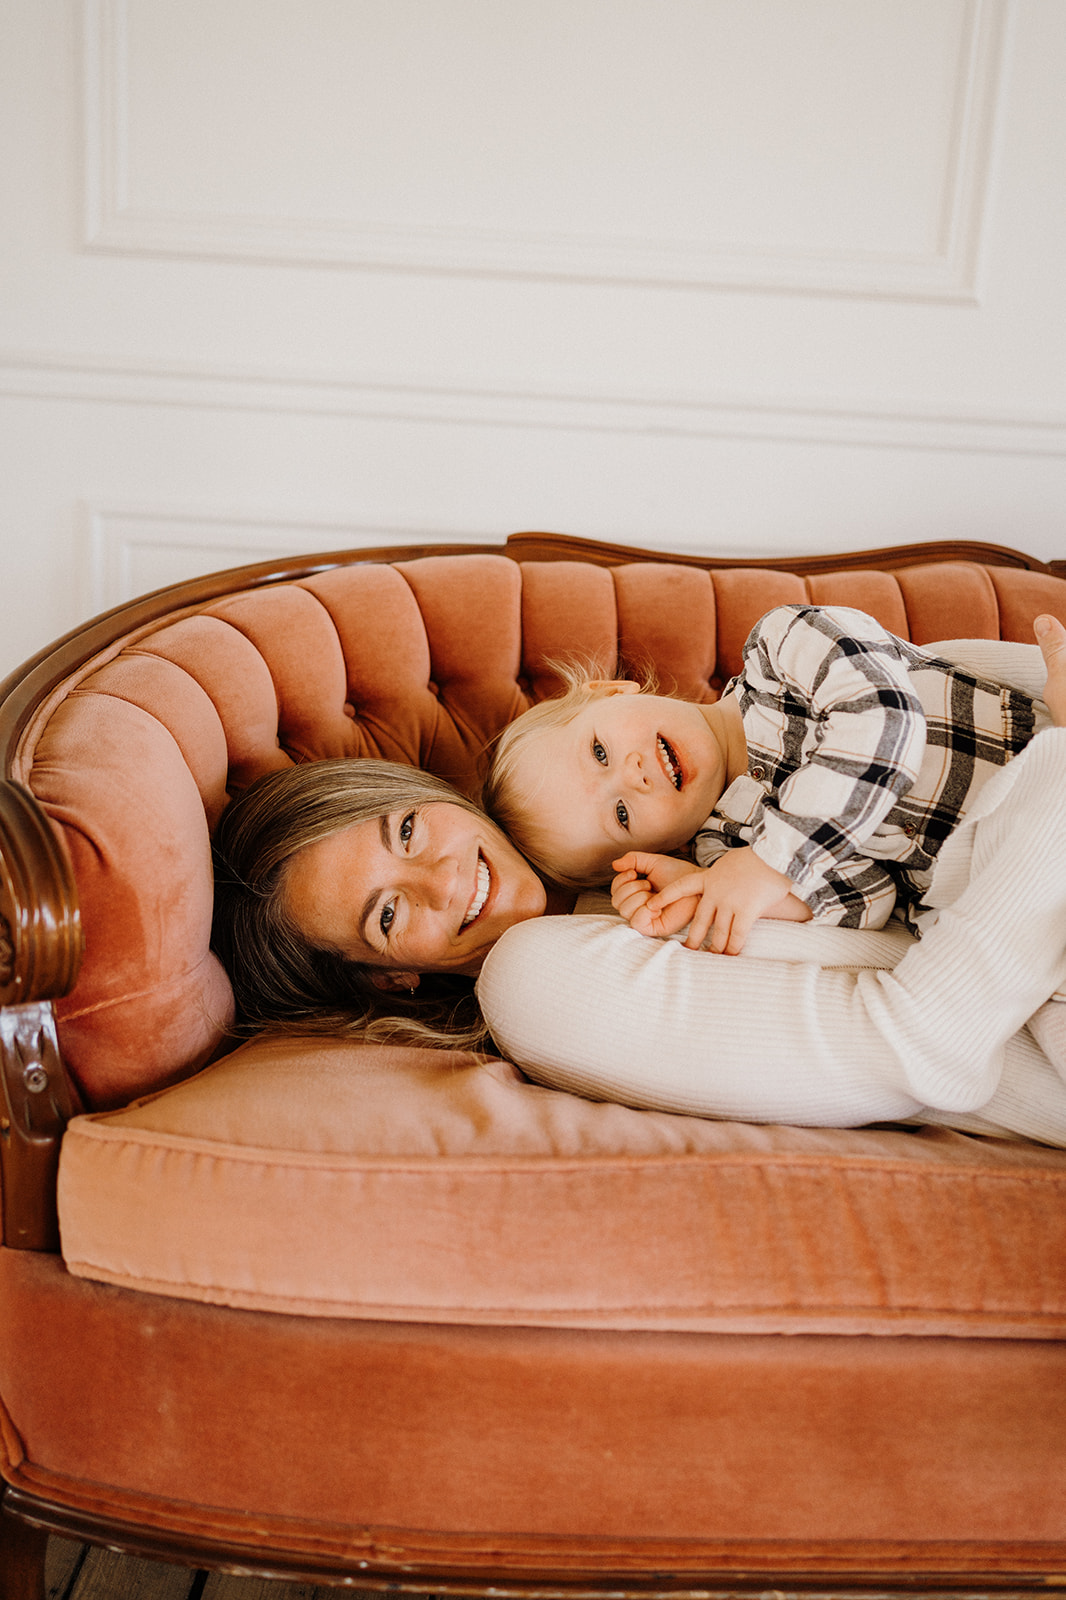 A mother and child lying on the couch together.